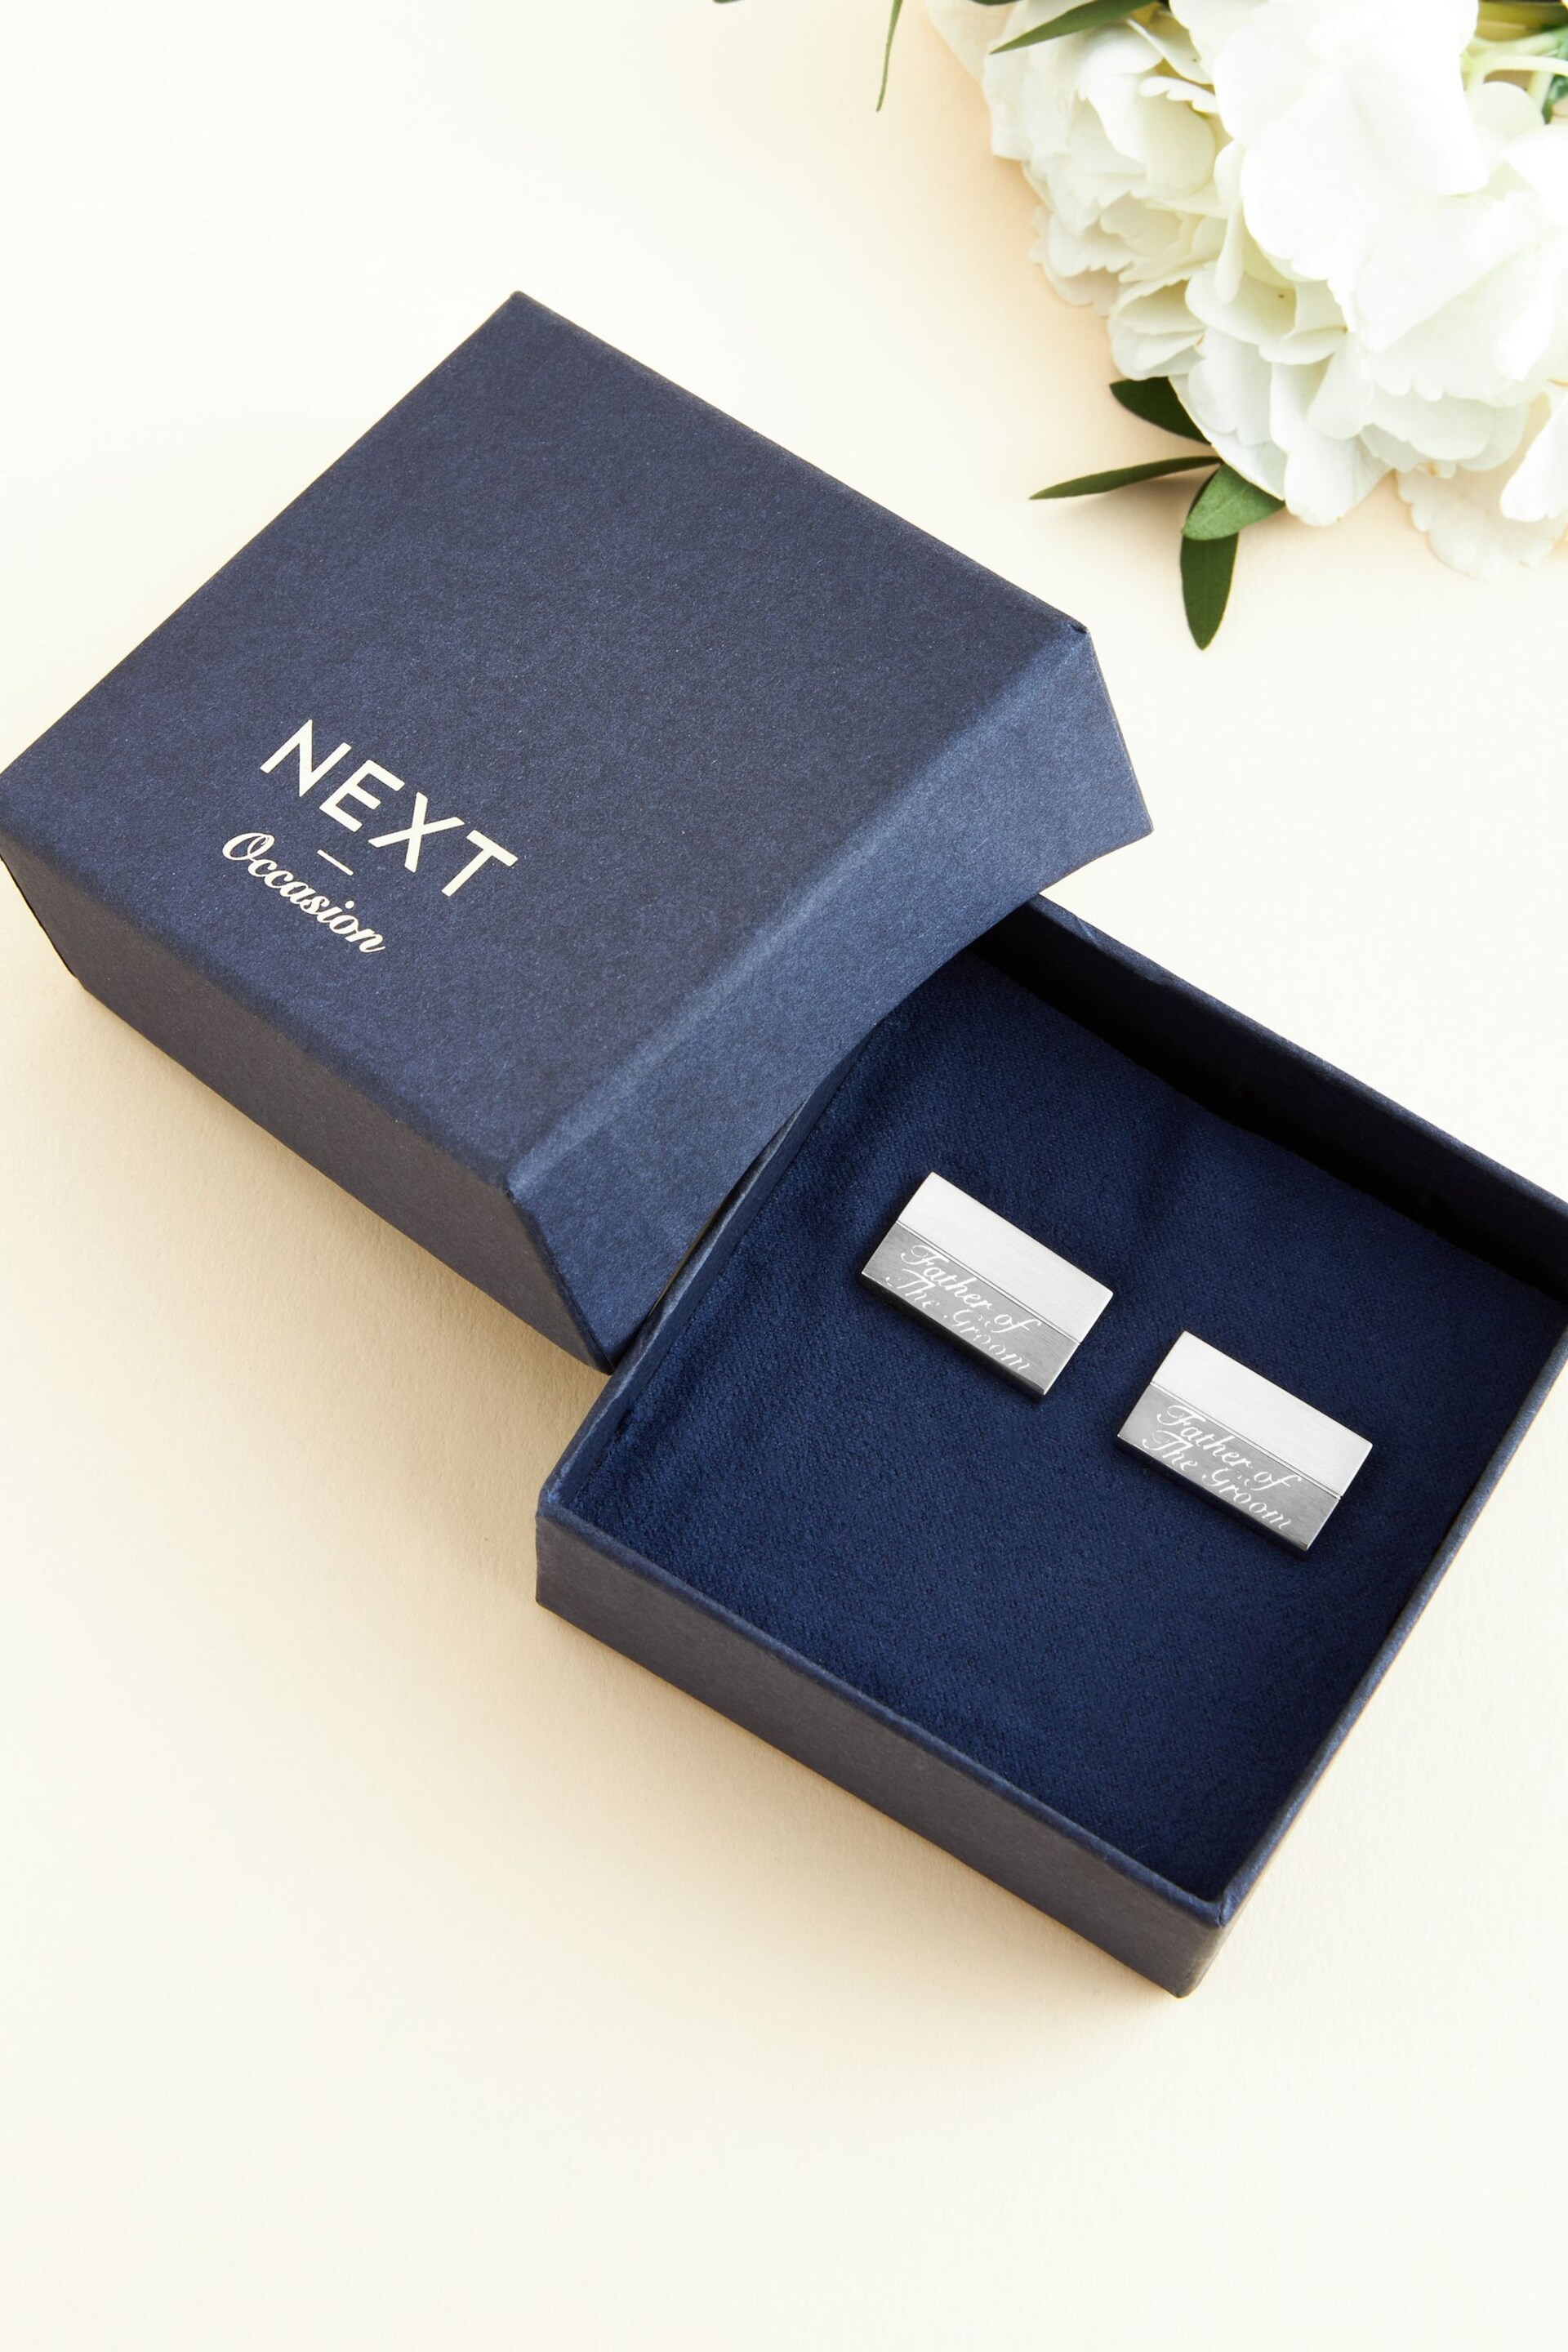 Silver Tone Father of the Bride Engraved Wedding Cufflinks - Image 6 of 7